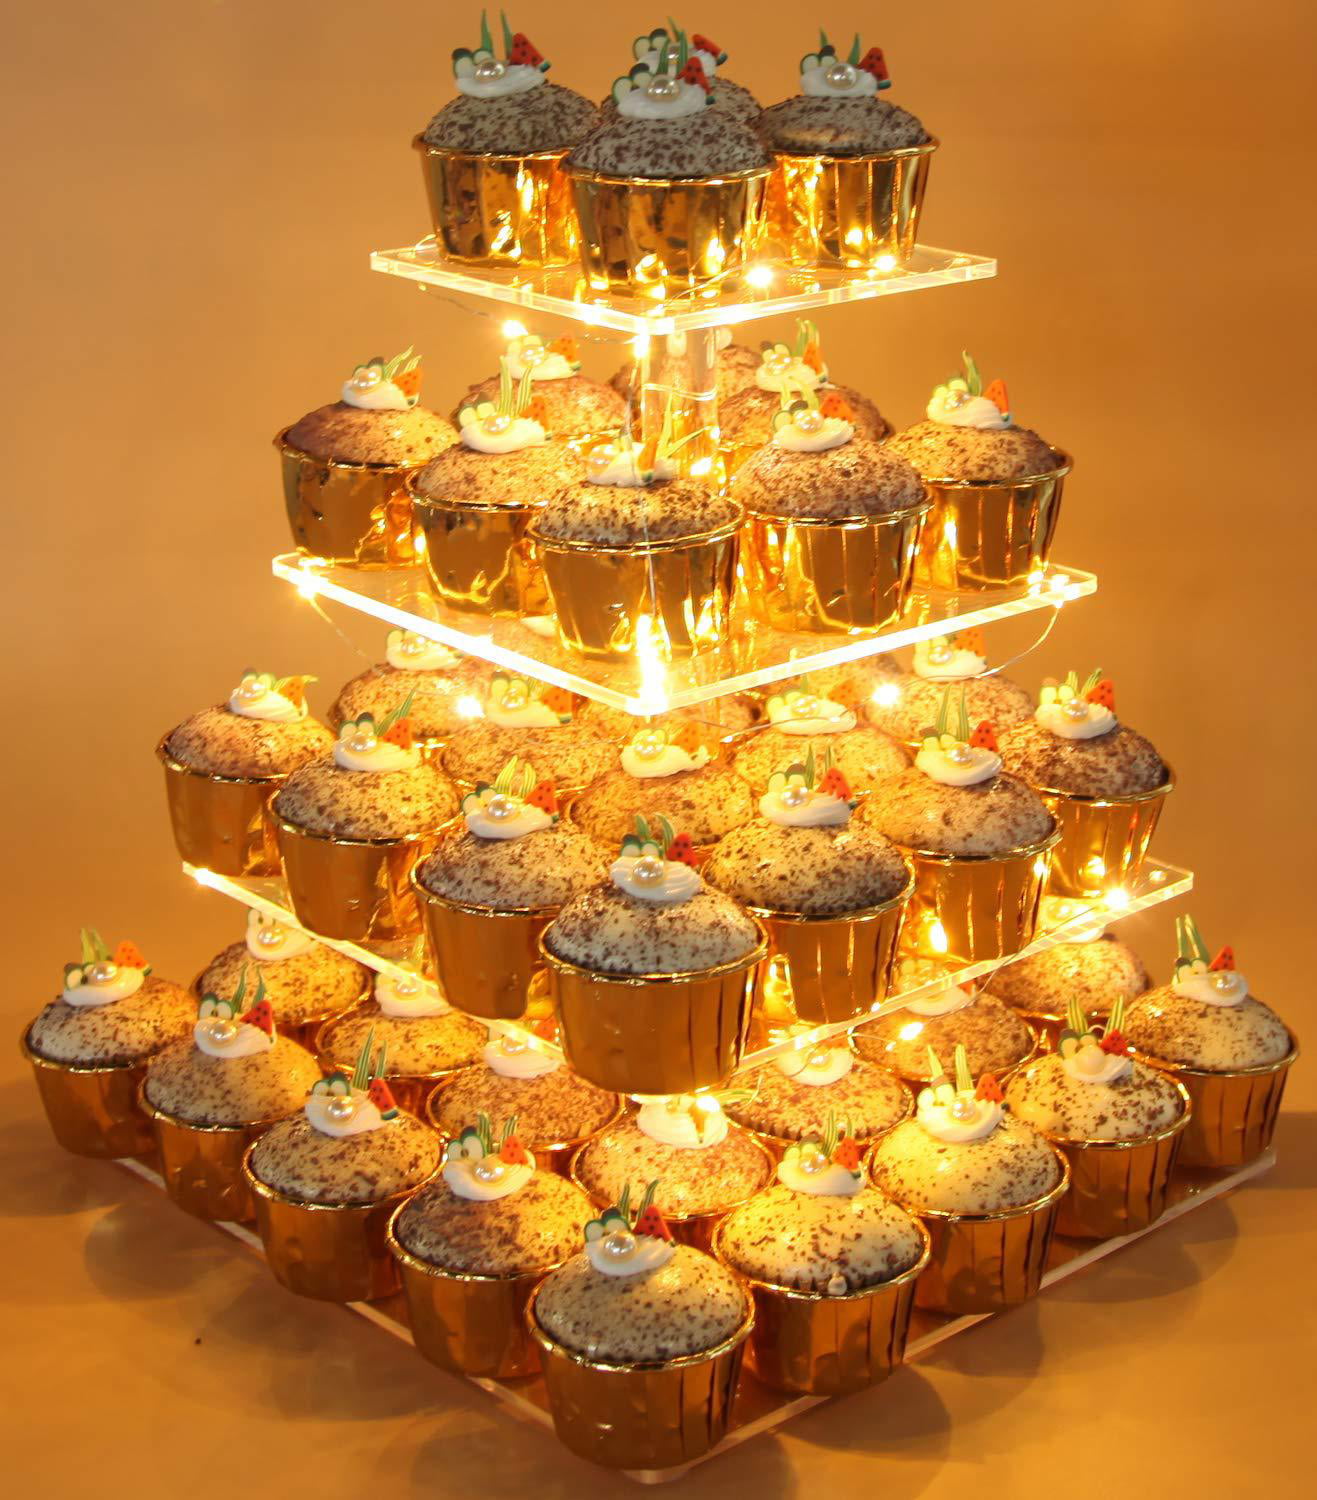 4 Tier Square Acrylic Cupcake Display Stand Holder Pastry Dessert Wedding Party